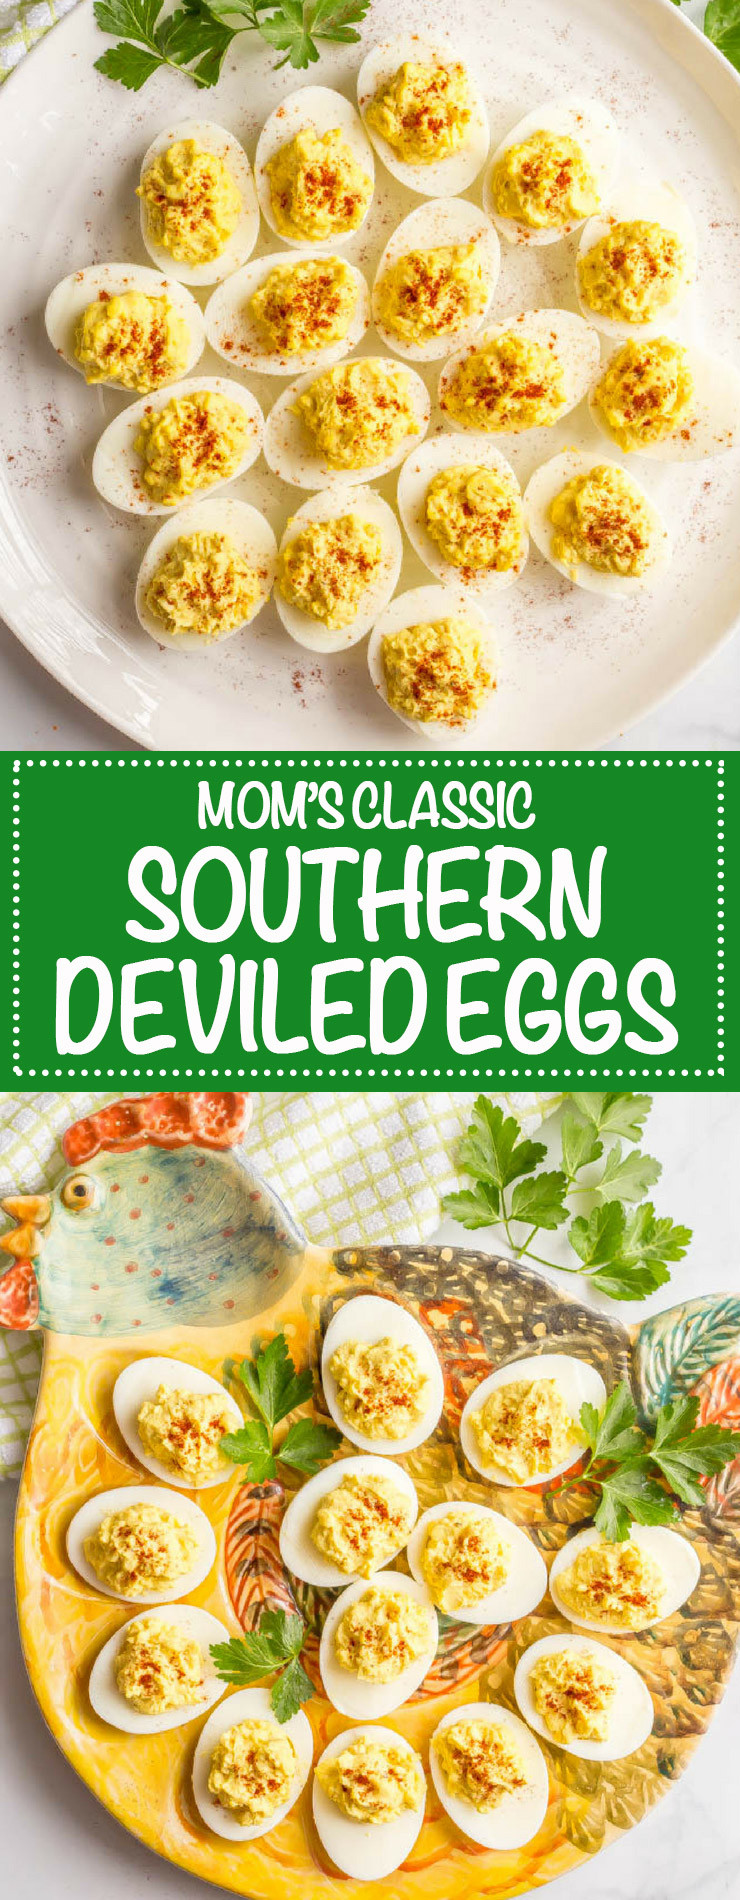 Southern Style Deviled Eggs
 Mom’s classic Southern deviled eggs Family Food on the Table